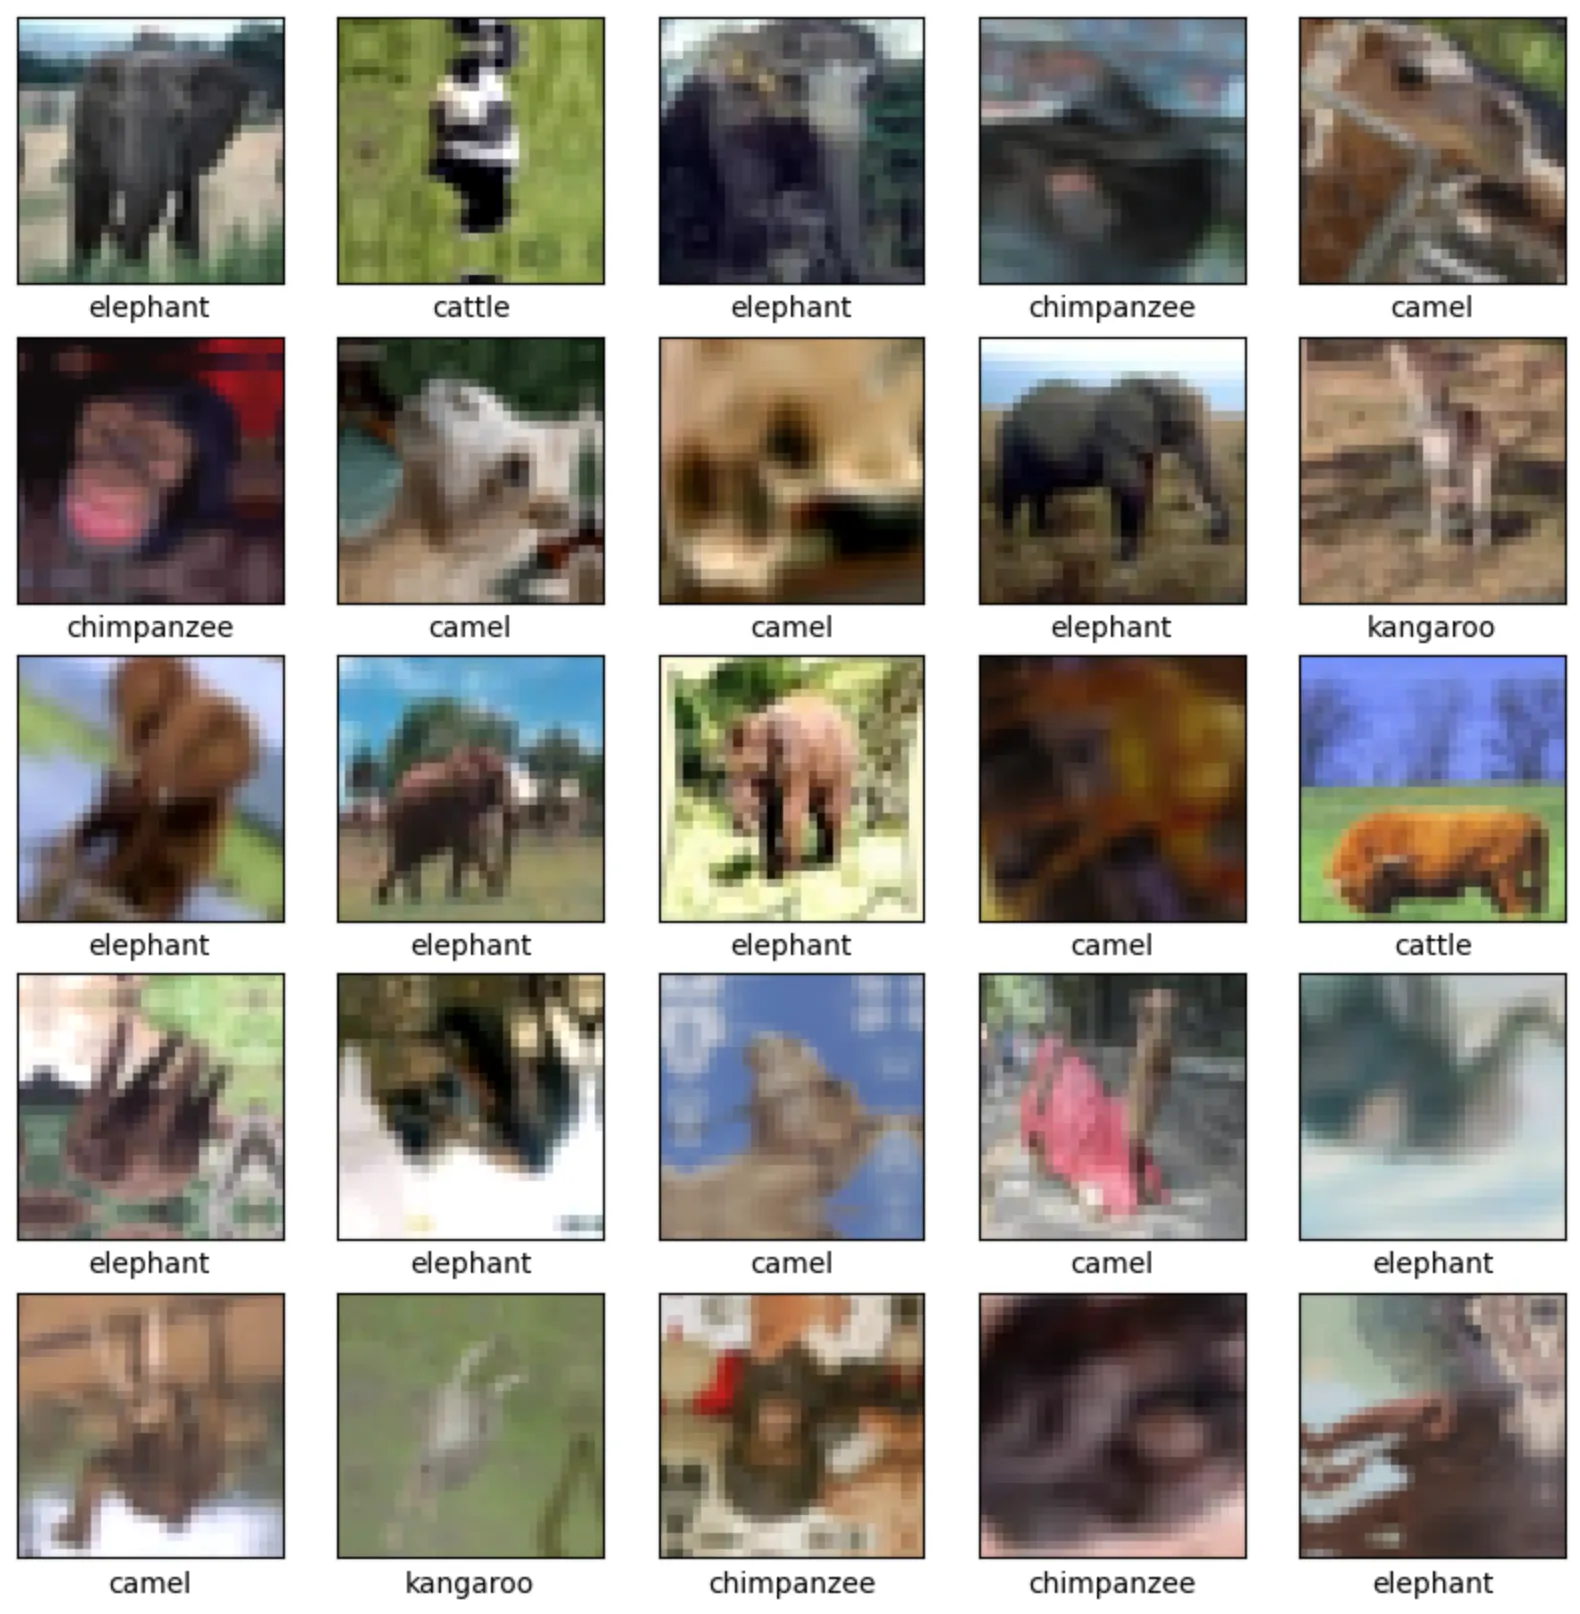 Image for Image Classification of Omnivores and Herbivores using the CIFAR-100 Dataset